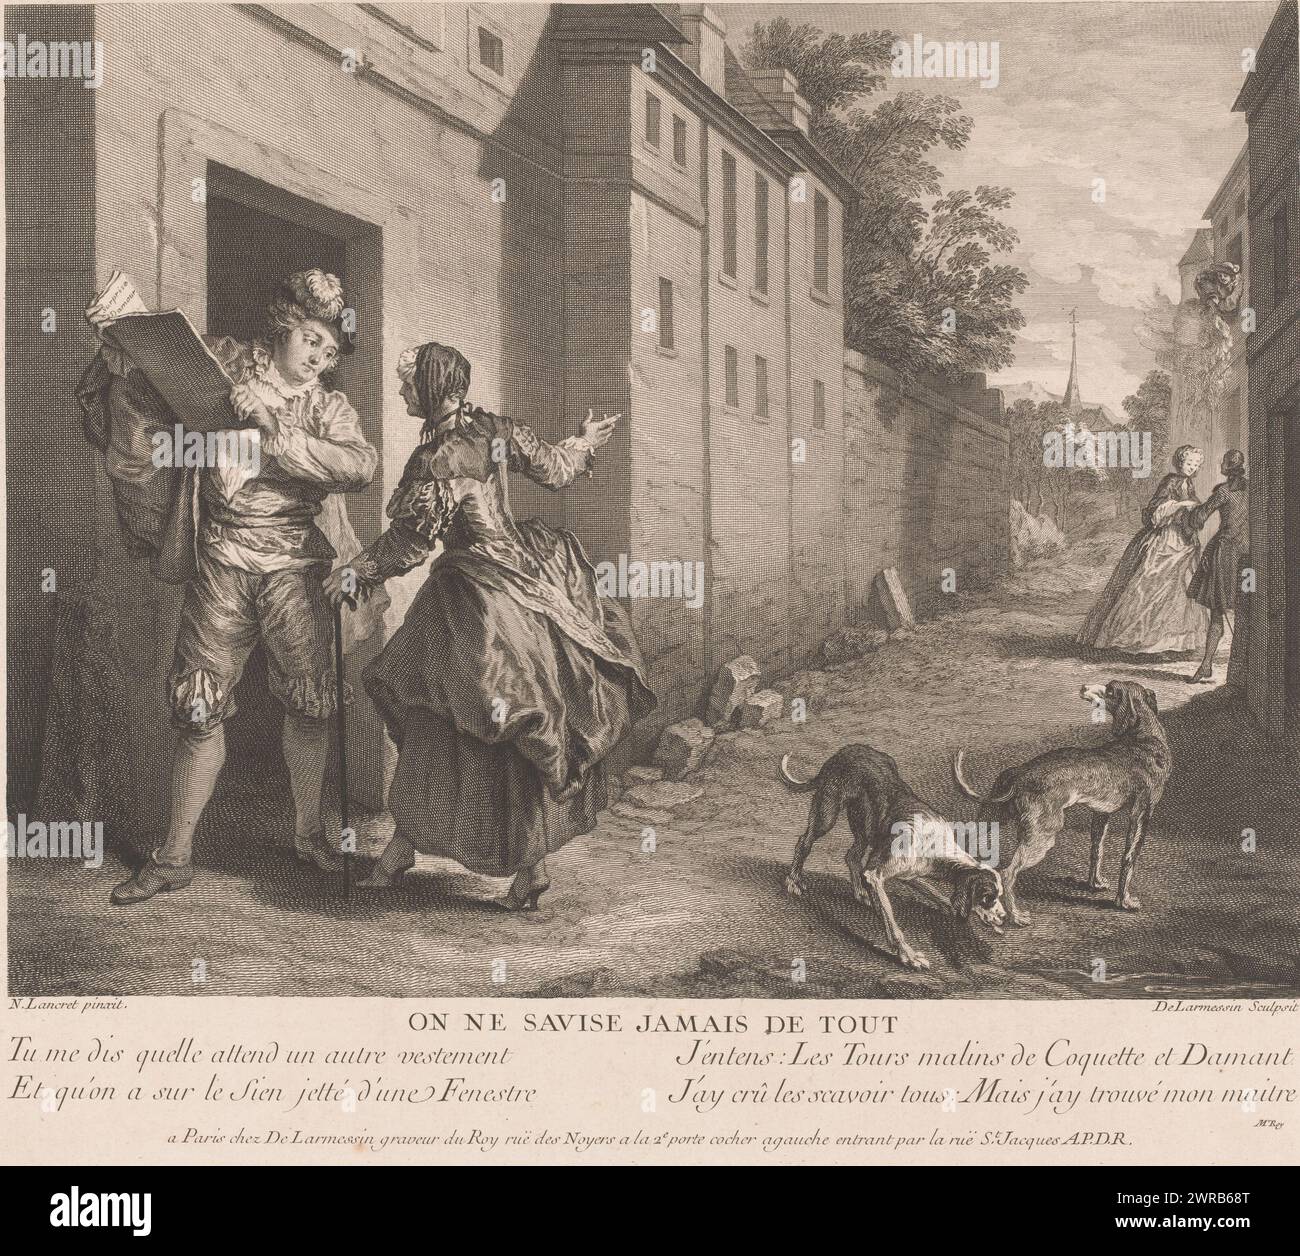 Street view with man with book, On ne savise jamais de tout (title on object), Fables by Jean de La Fontaine (series title), Suite d'Estampes Nouvelles pour les Contes de La Fontaine (series title), Elegantly dressed man with a open book is warned by an old woman. She gestures to a figure further along who is emptying his waste bin out the window onto the street., print maker: Nicolas de Larmessin (III), after painting by: Nicolas Lancret, M. Roy, publisher: Paris, France, 1736 - 1738, paper, etching, engraving, height 326 mm × width 370 mm Stock Photo